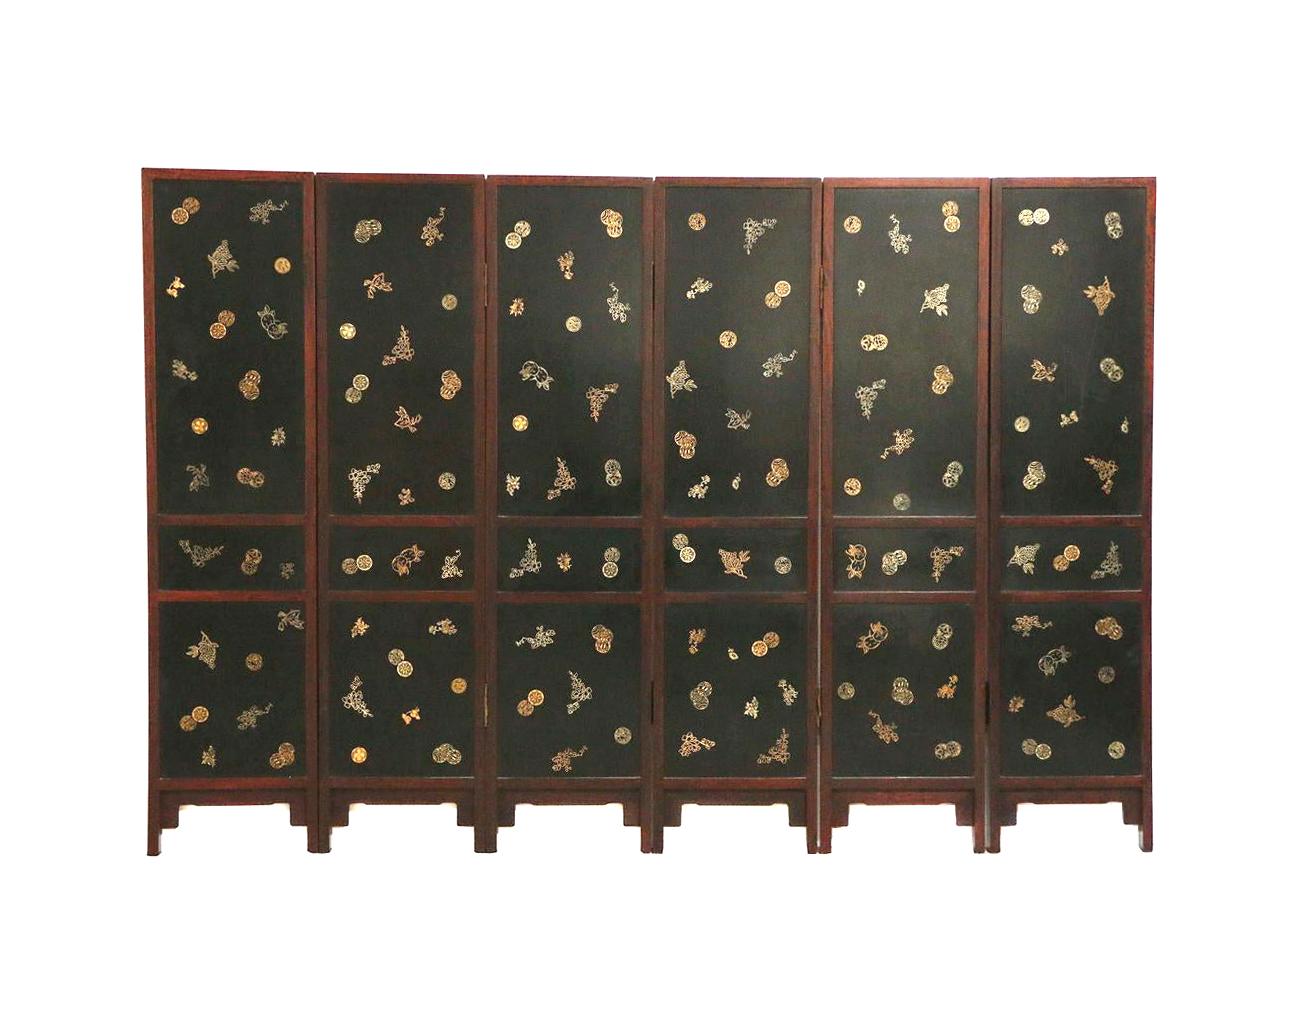 A six panel hinged folding floor screen from China circa end of the 19th- early 20th century. Each panel features three sections of black lacquered panels inlaid with a variety of objects carved from hard stones. The top features flowers in vases,